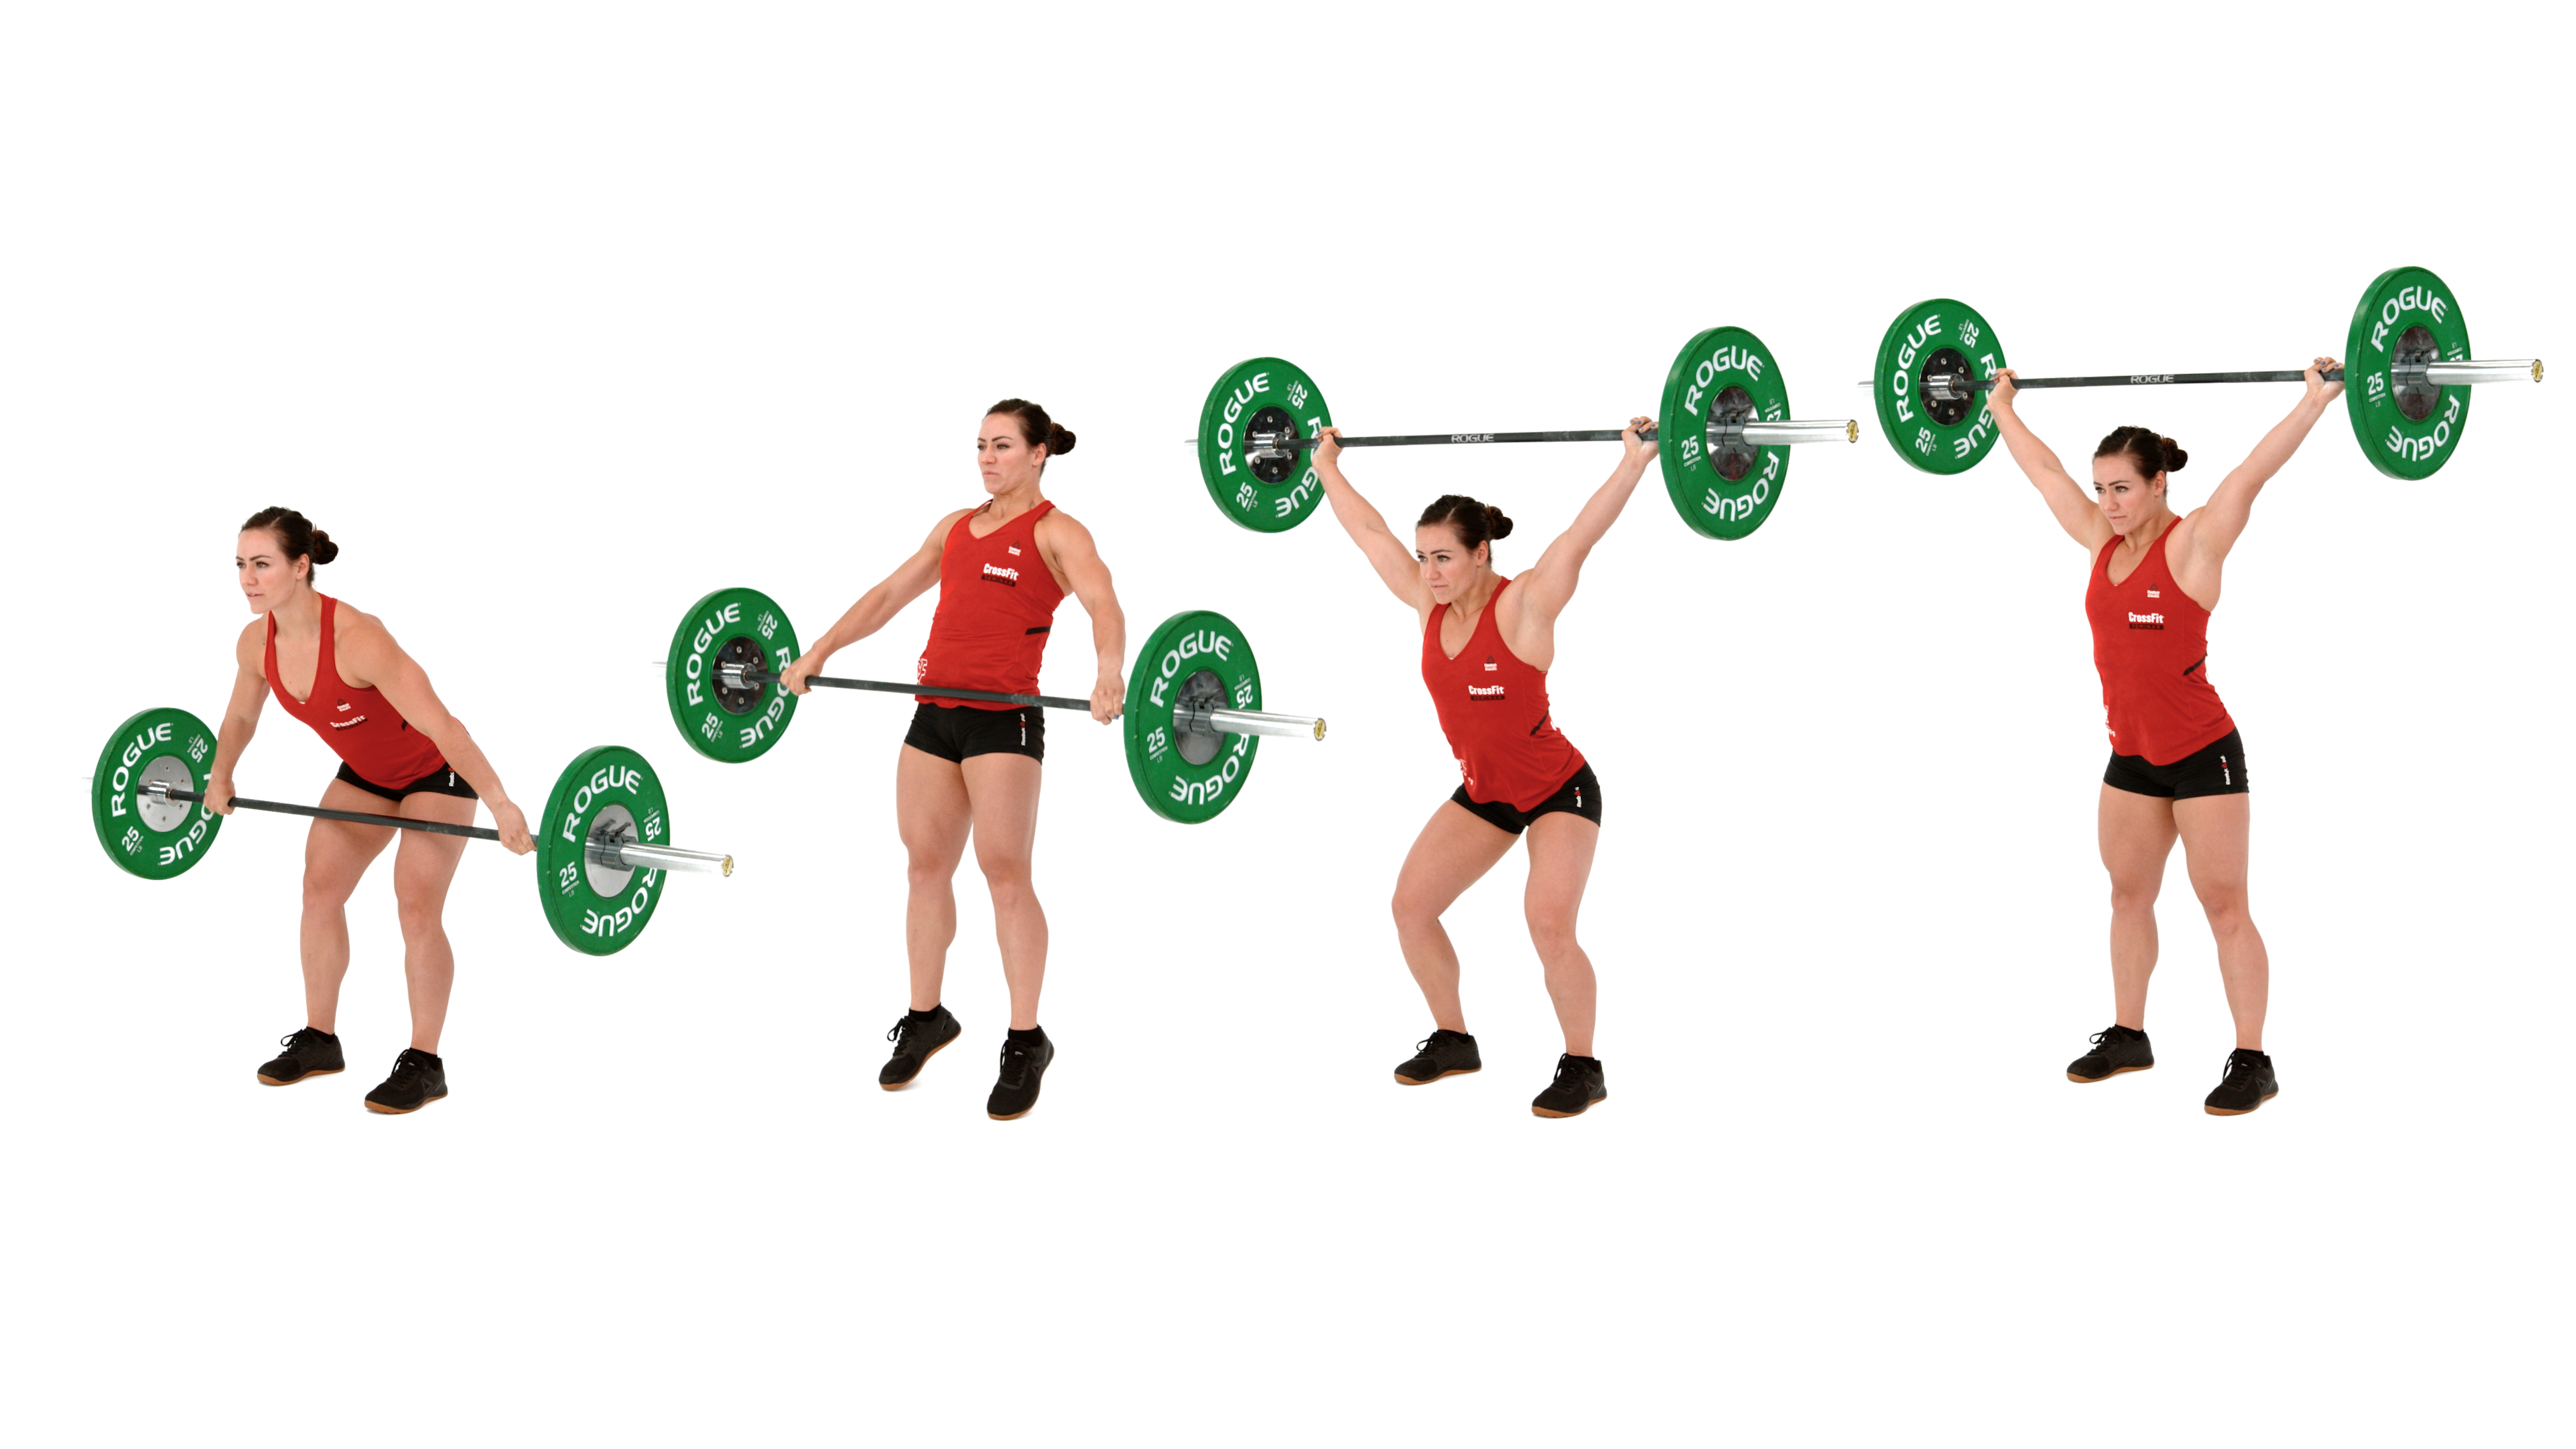 https://www.crossfit.com/wp-content/uploads/2019/09/12102341/HangPowerSnatch-collage-large.png